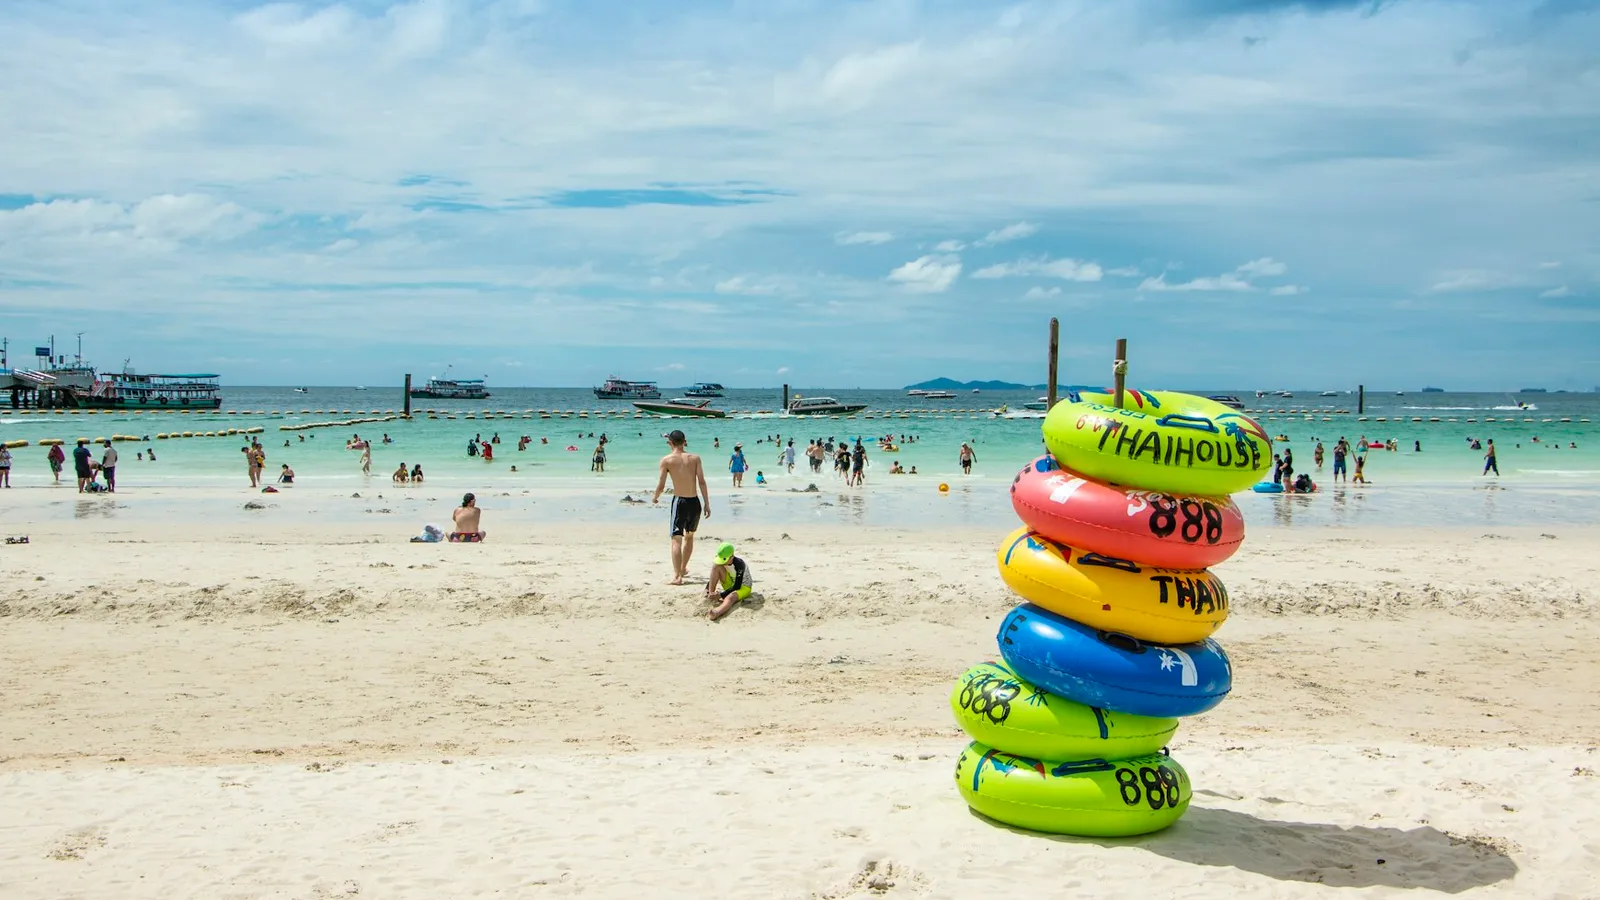 Stay vigilant while visiting Pattaya! Here are the top 10 scams tourists should be aware of, and tips on how to spot, react, and avoid falling victim.